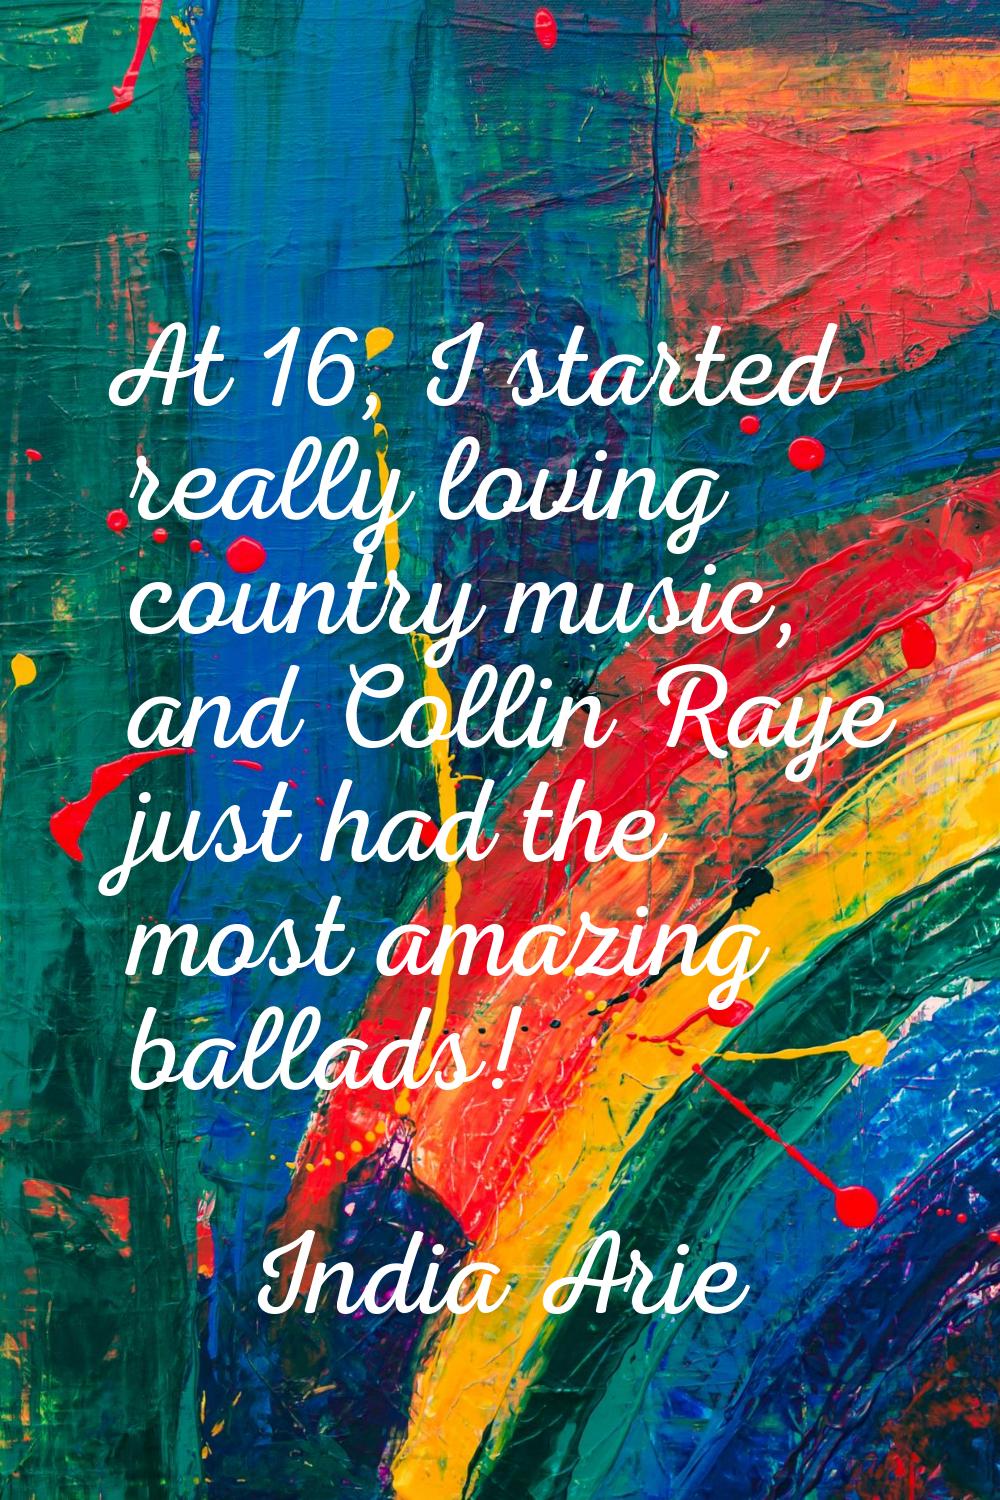 At 16, I started really loving country music, and Collin Raye just had the most amazing ballads!